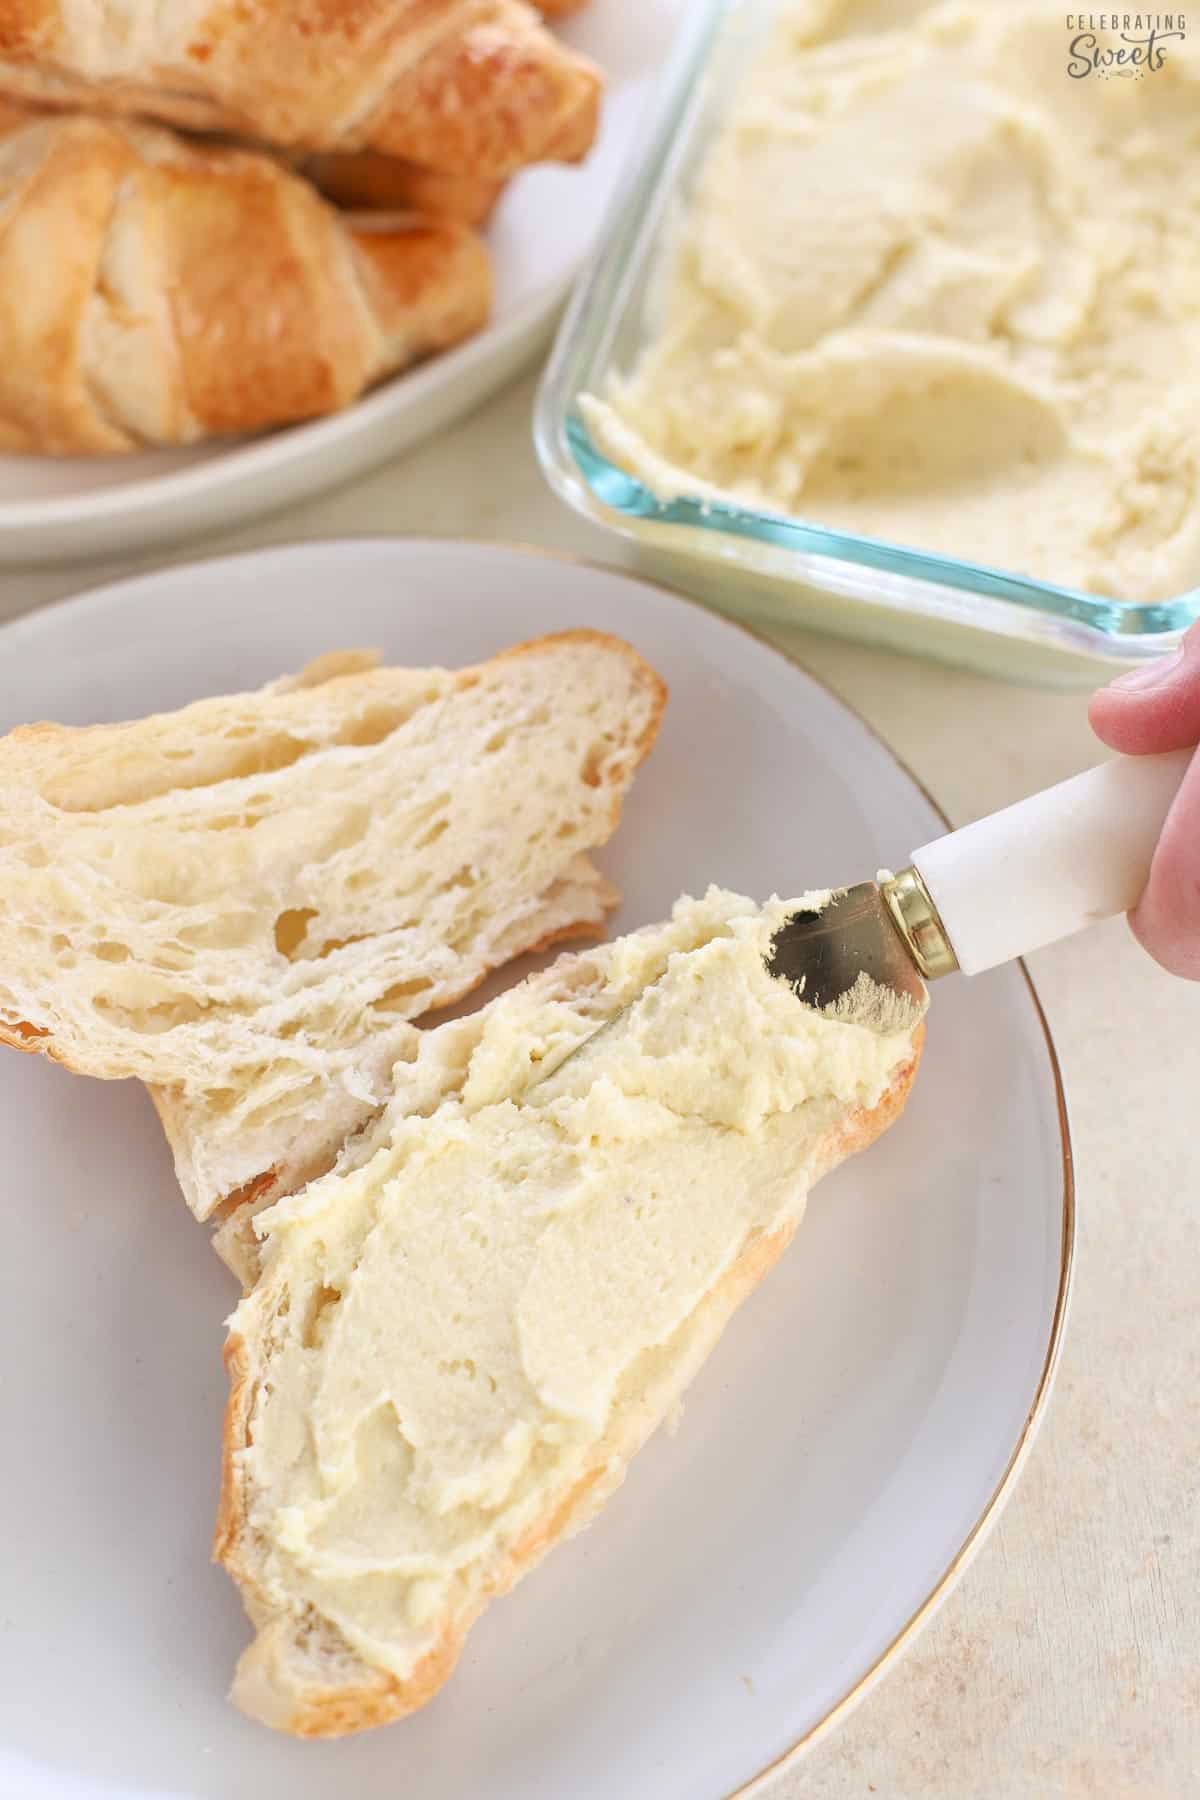 Almond cream being spread on a croissant